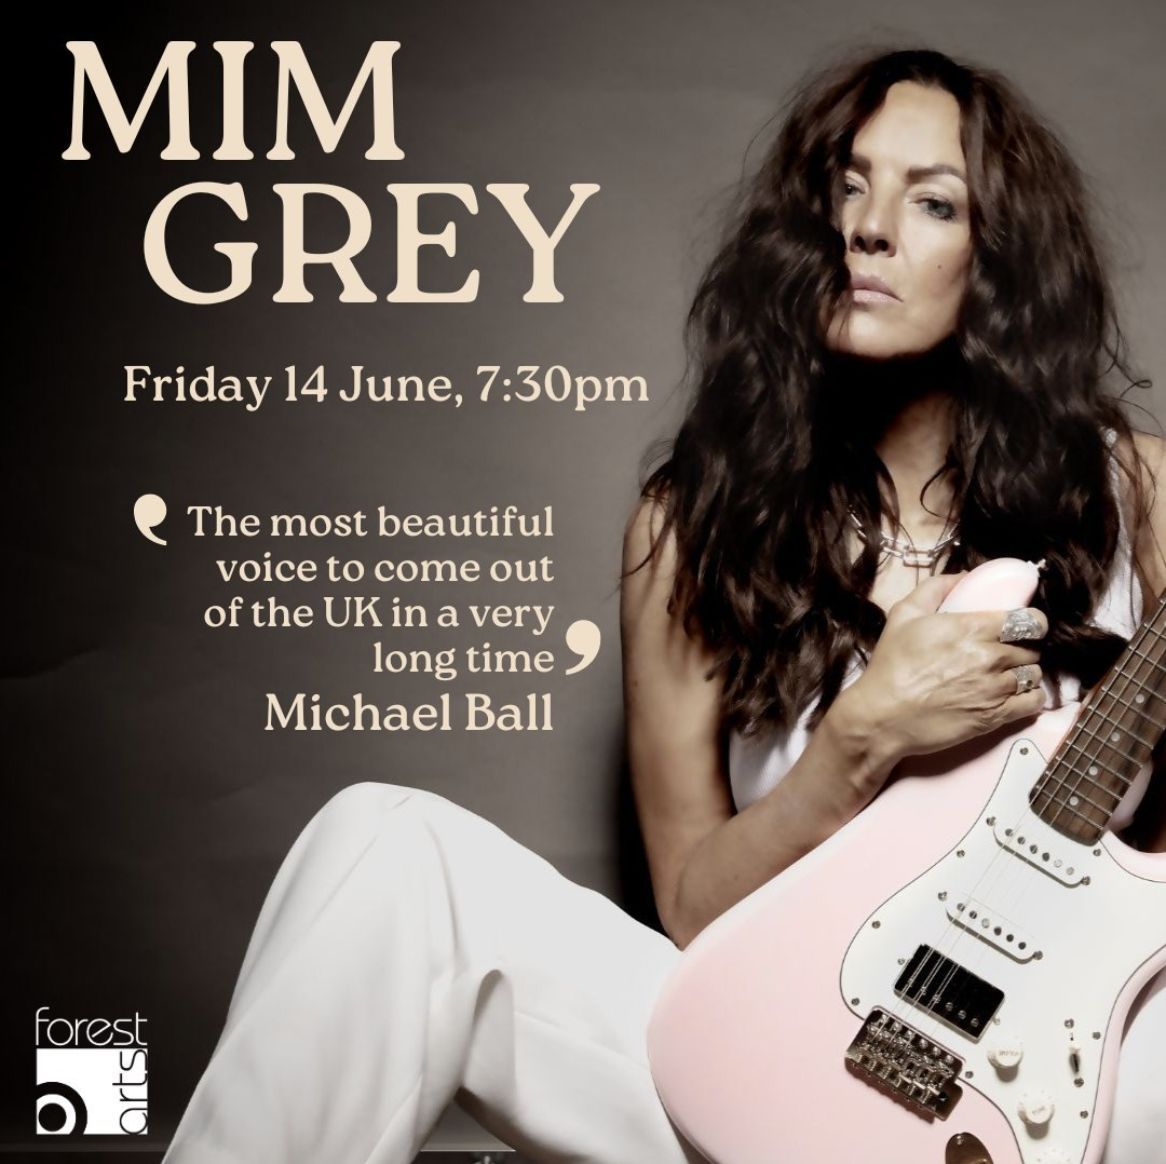 Have you got your tickets to see Mim Grey yet? 😆 Her creative prowess has seen her collaborating with the crème de la crème, including Sir Paul McCartney and co-writing songs for Kylie Minogue. ✨ Tickets: buff.ly/4dhb71k